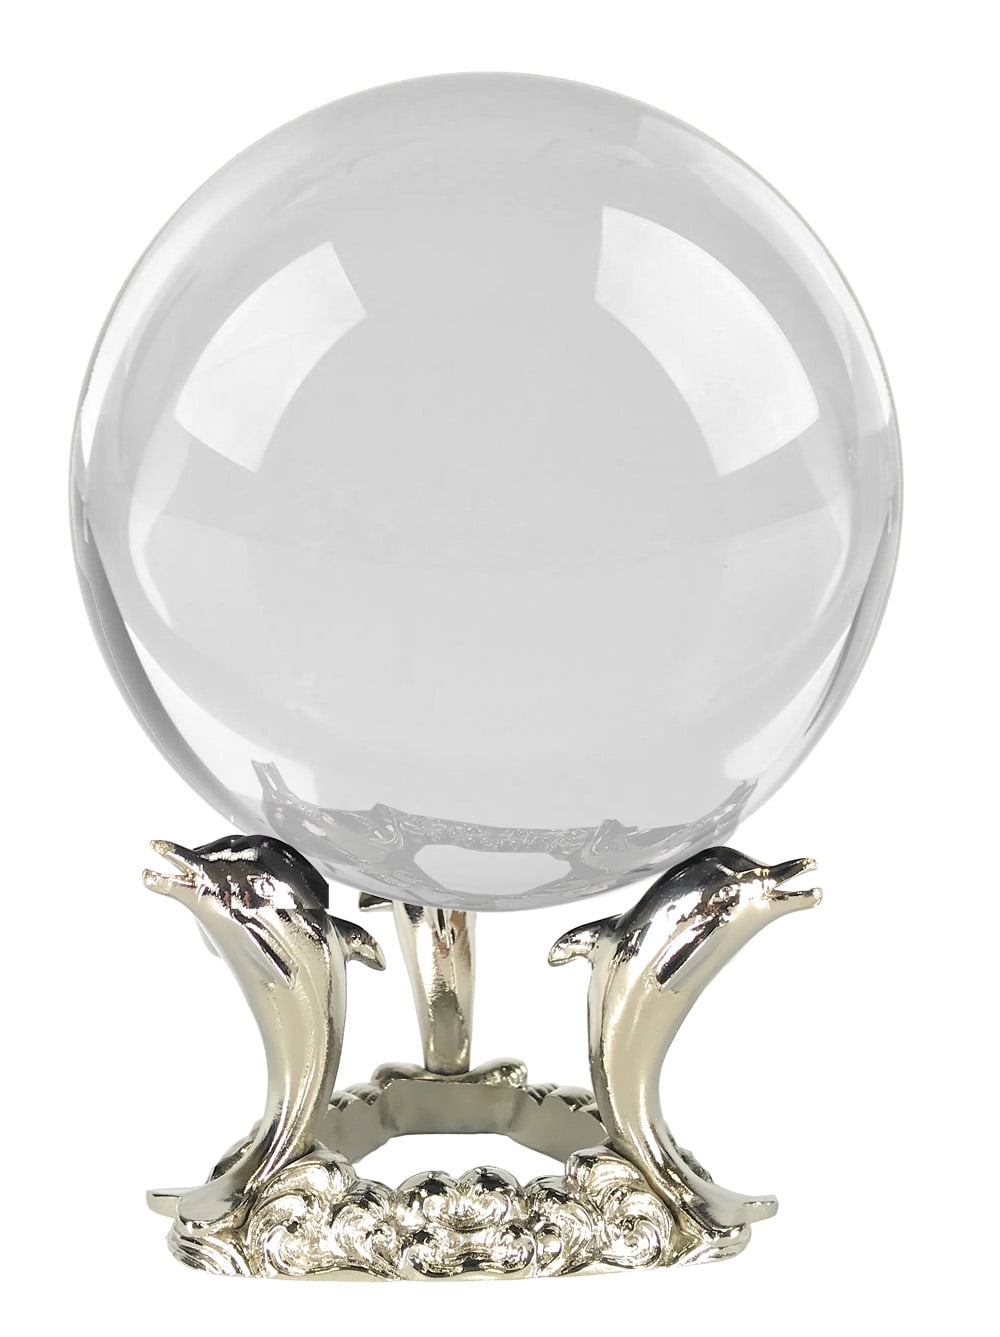 and Fortune 80 mm Black Obsidian Crystal Ball 3 inch with Wooden Stand， Decorative Ball， Gazing Divination or Feng Shui